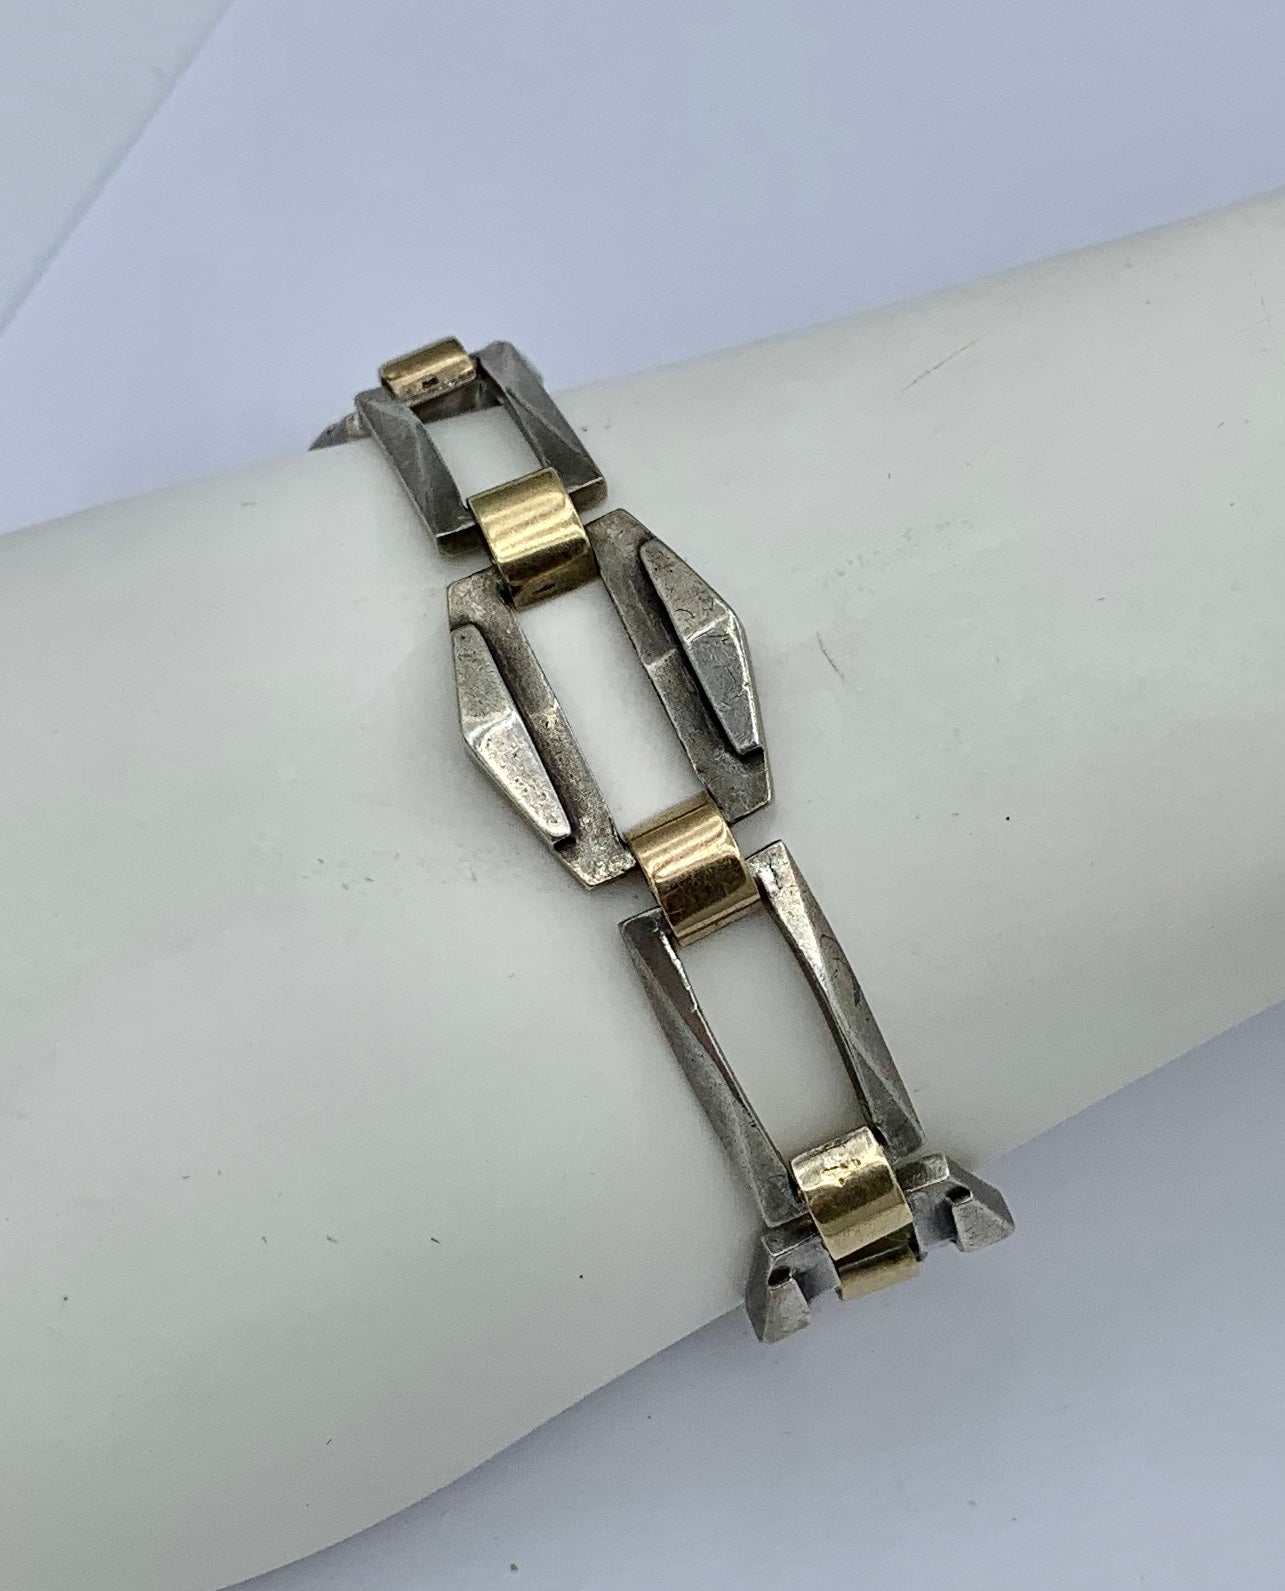 This is a wonderful Modernist Machine Age Art Deco Bracelet in Sterling Silver with Gold dating to circa 1920-1930 from Barcelona.  The Spanish modernist designs are of the highest quality.  The silver work is heavy and substantial.  The Barcelona